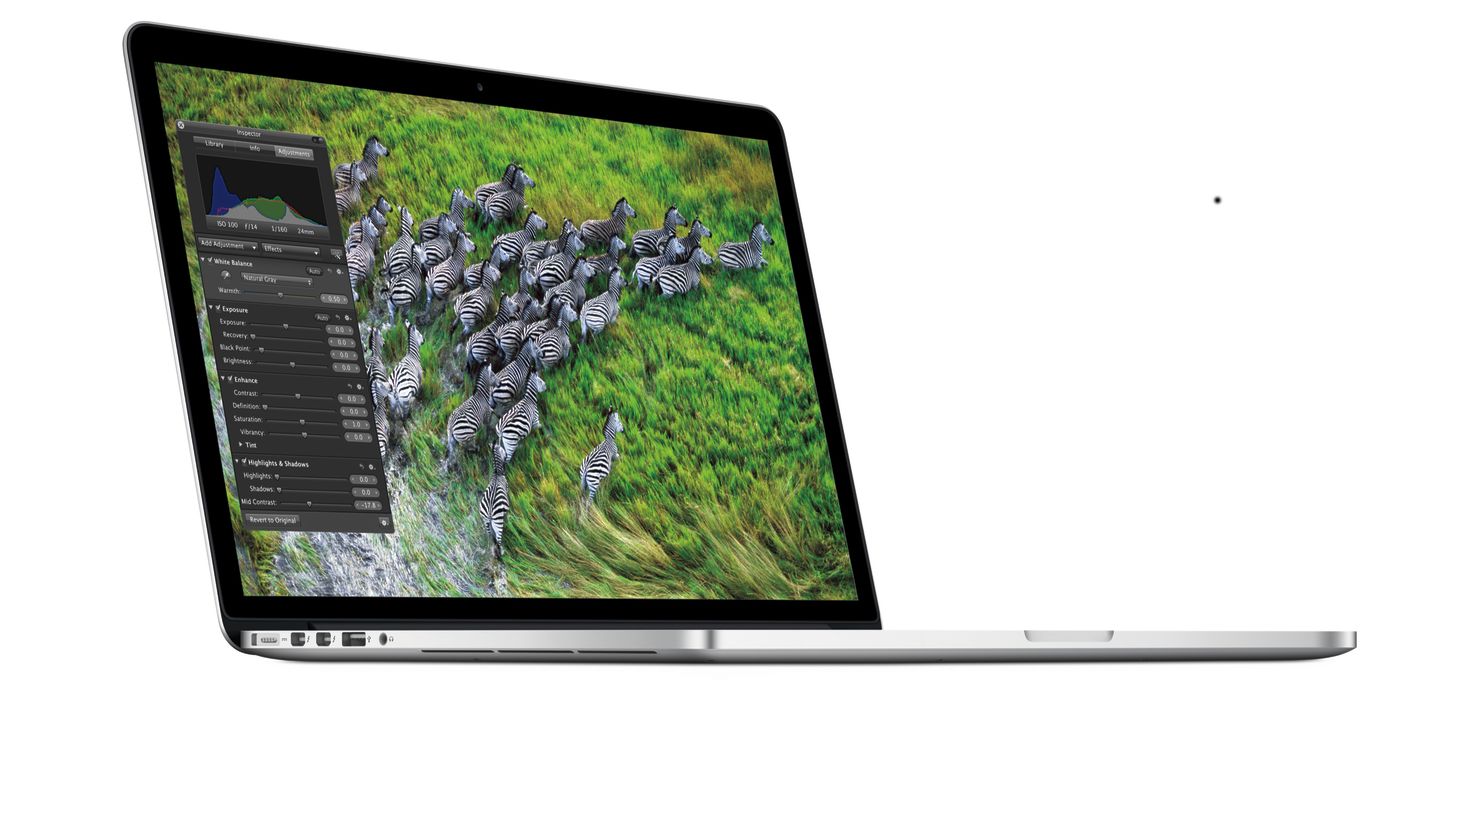 Thanks to its non-removable battery, Apple's MacBook Pro with retina display may be difficult to recycle or disassemble.